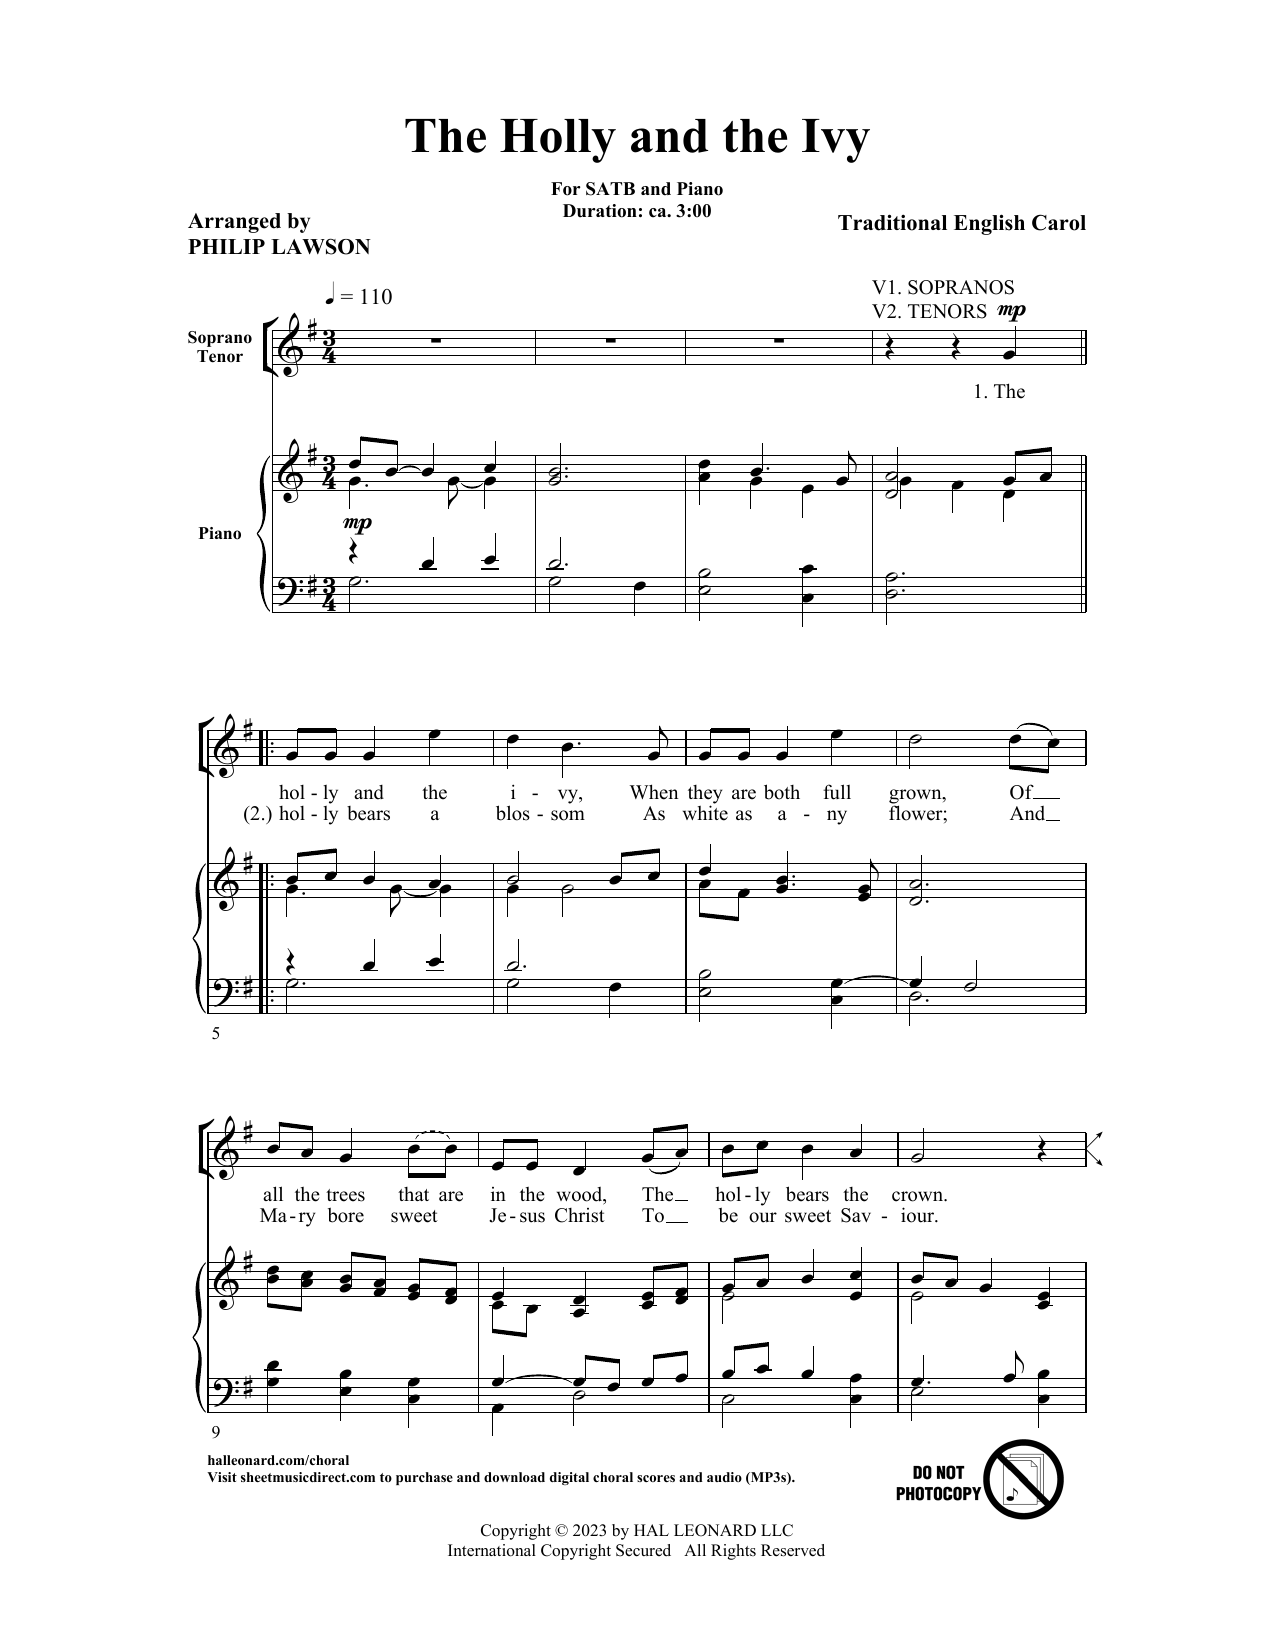 Traditional English Carol The Holly And The Ivy (arr. Philip Lawson) sheet music notes printable PDF score